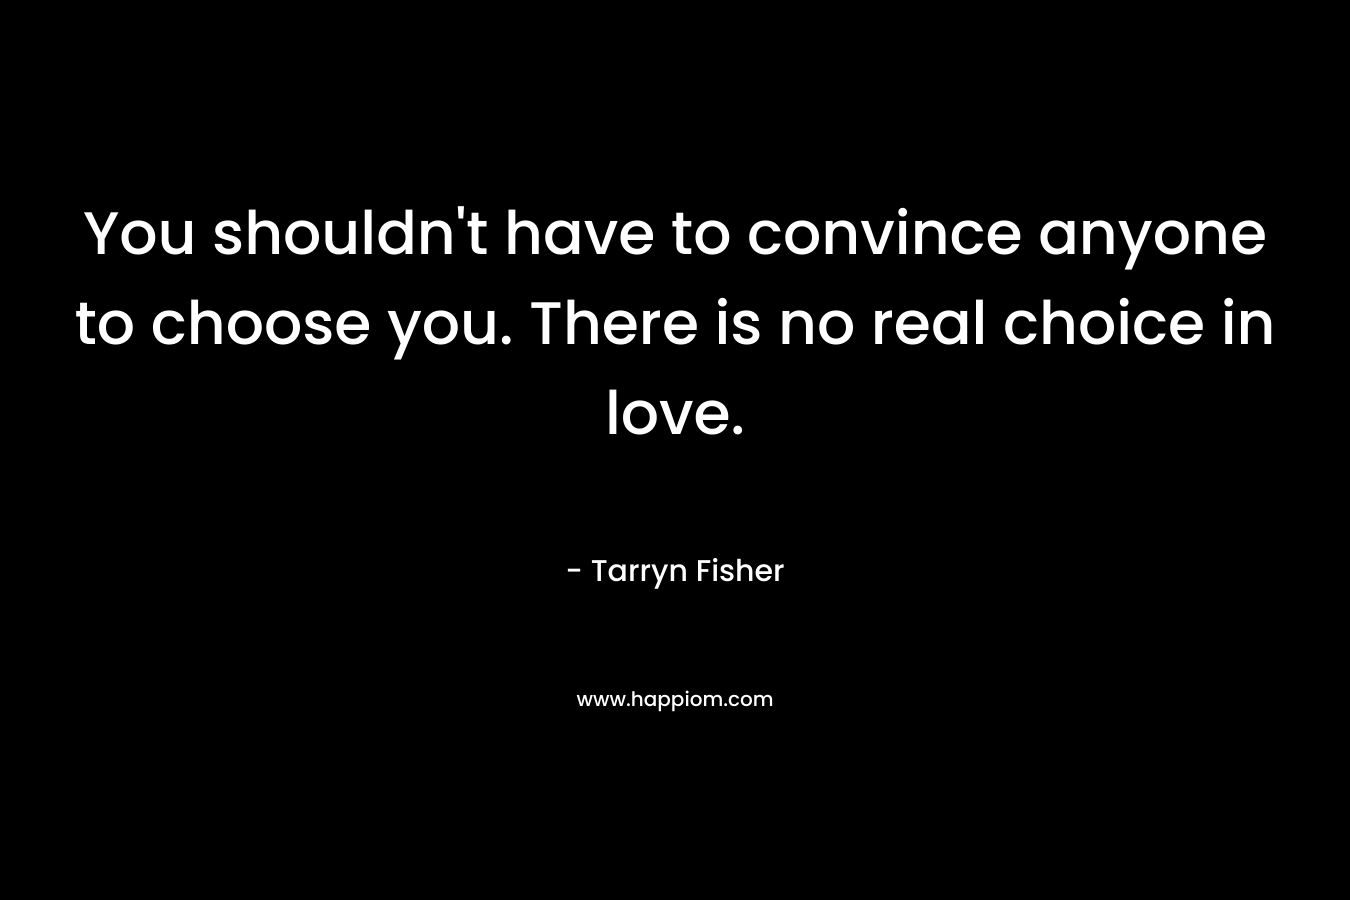 You shouldn’t have to convince anyone to choose you. There is no real choice in love. – Tarryn Fisher